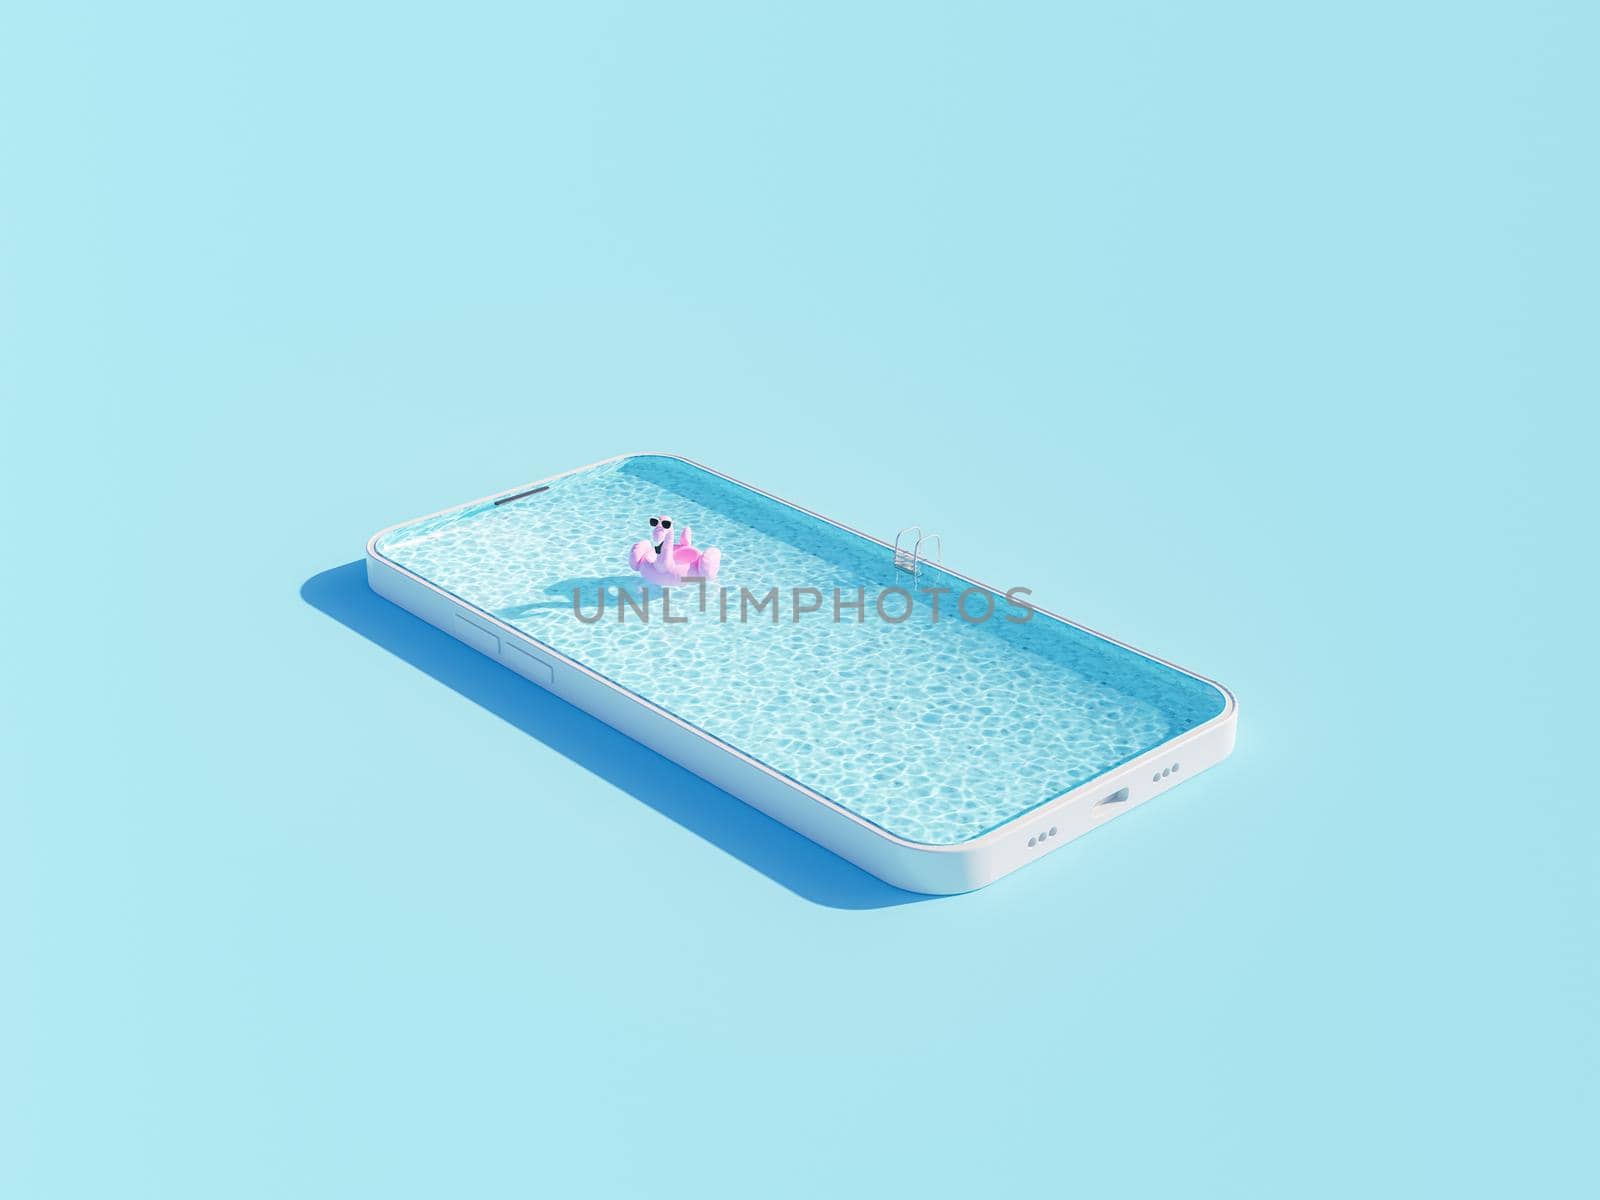 From above creative 3D rendering with pink inflatable flamingo in rippling swimming pool inside of mobile phone case against blue background